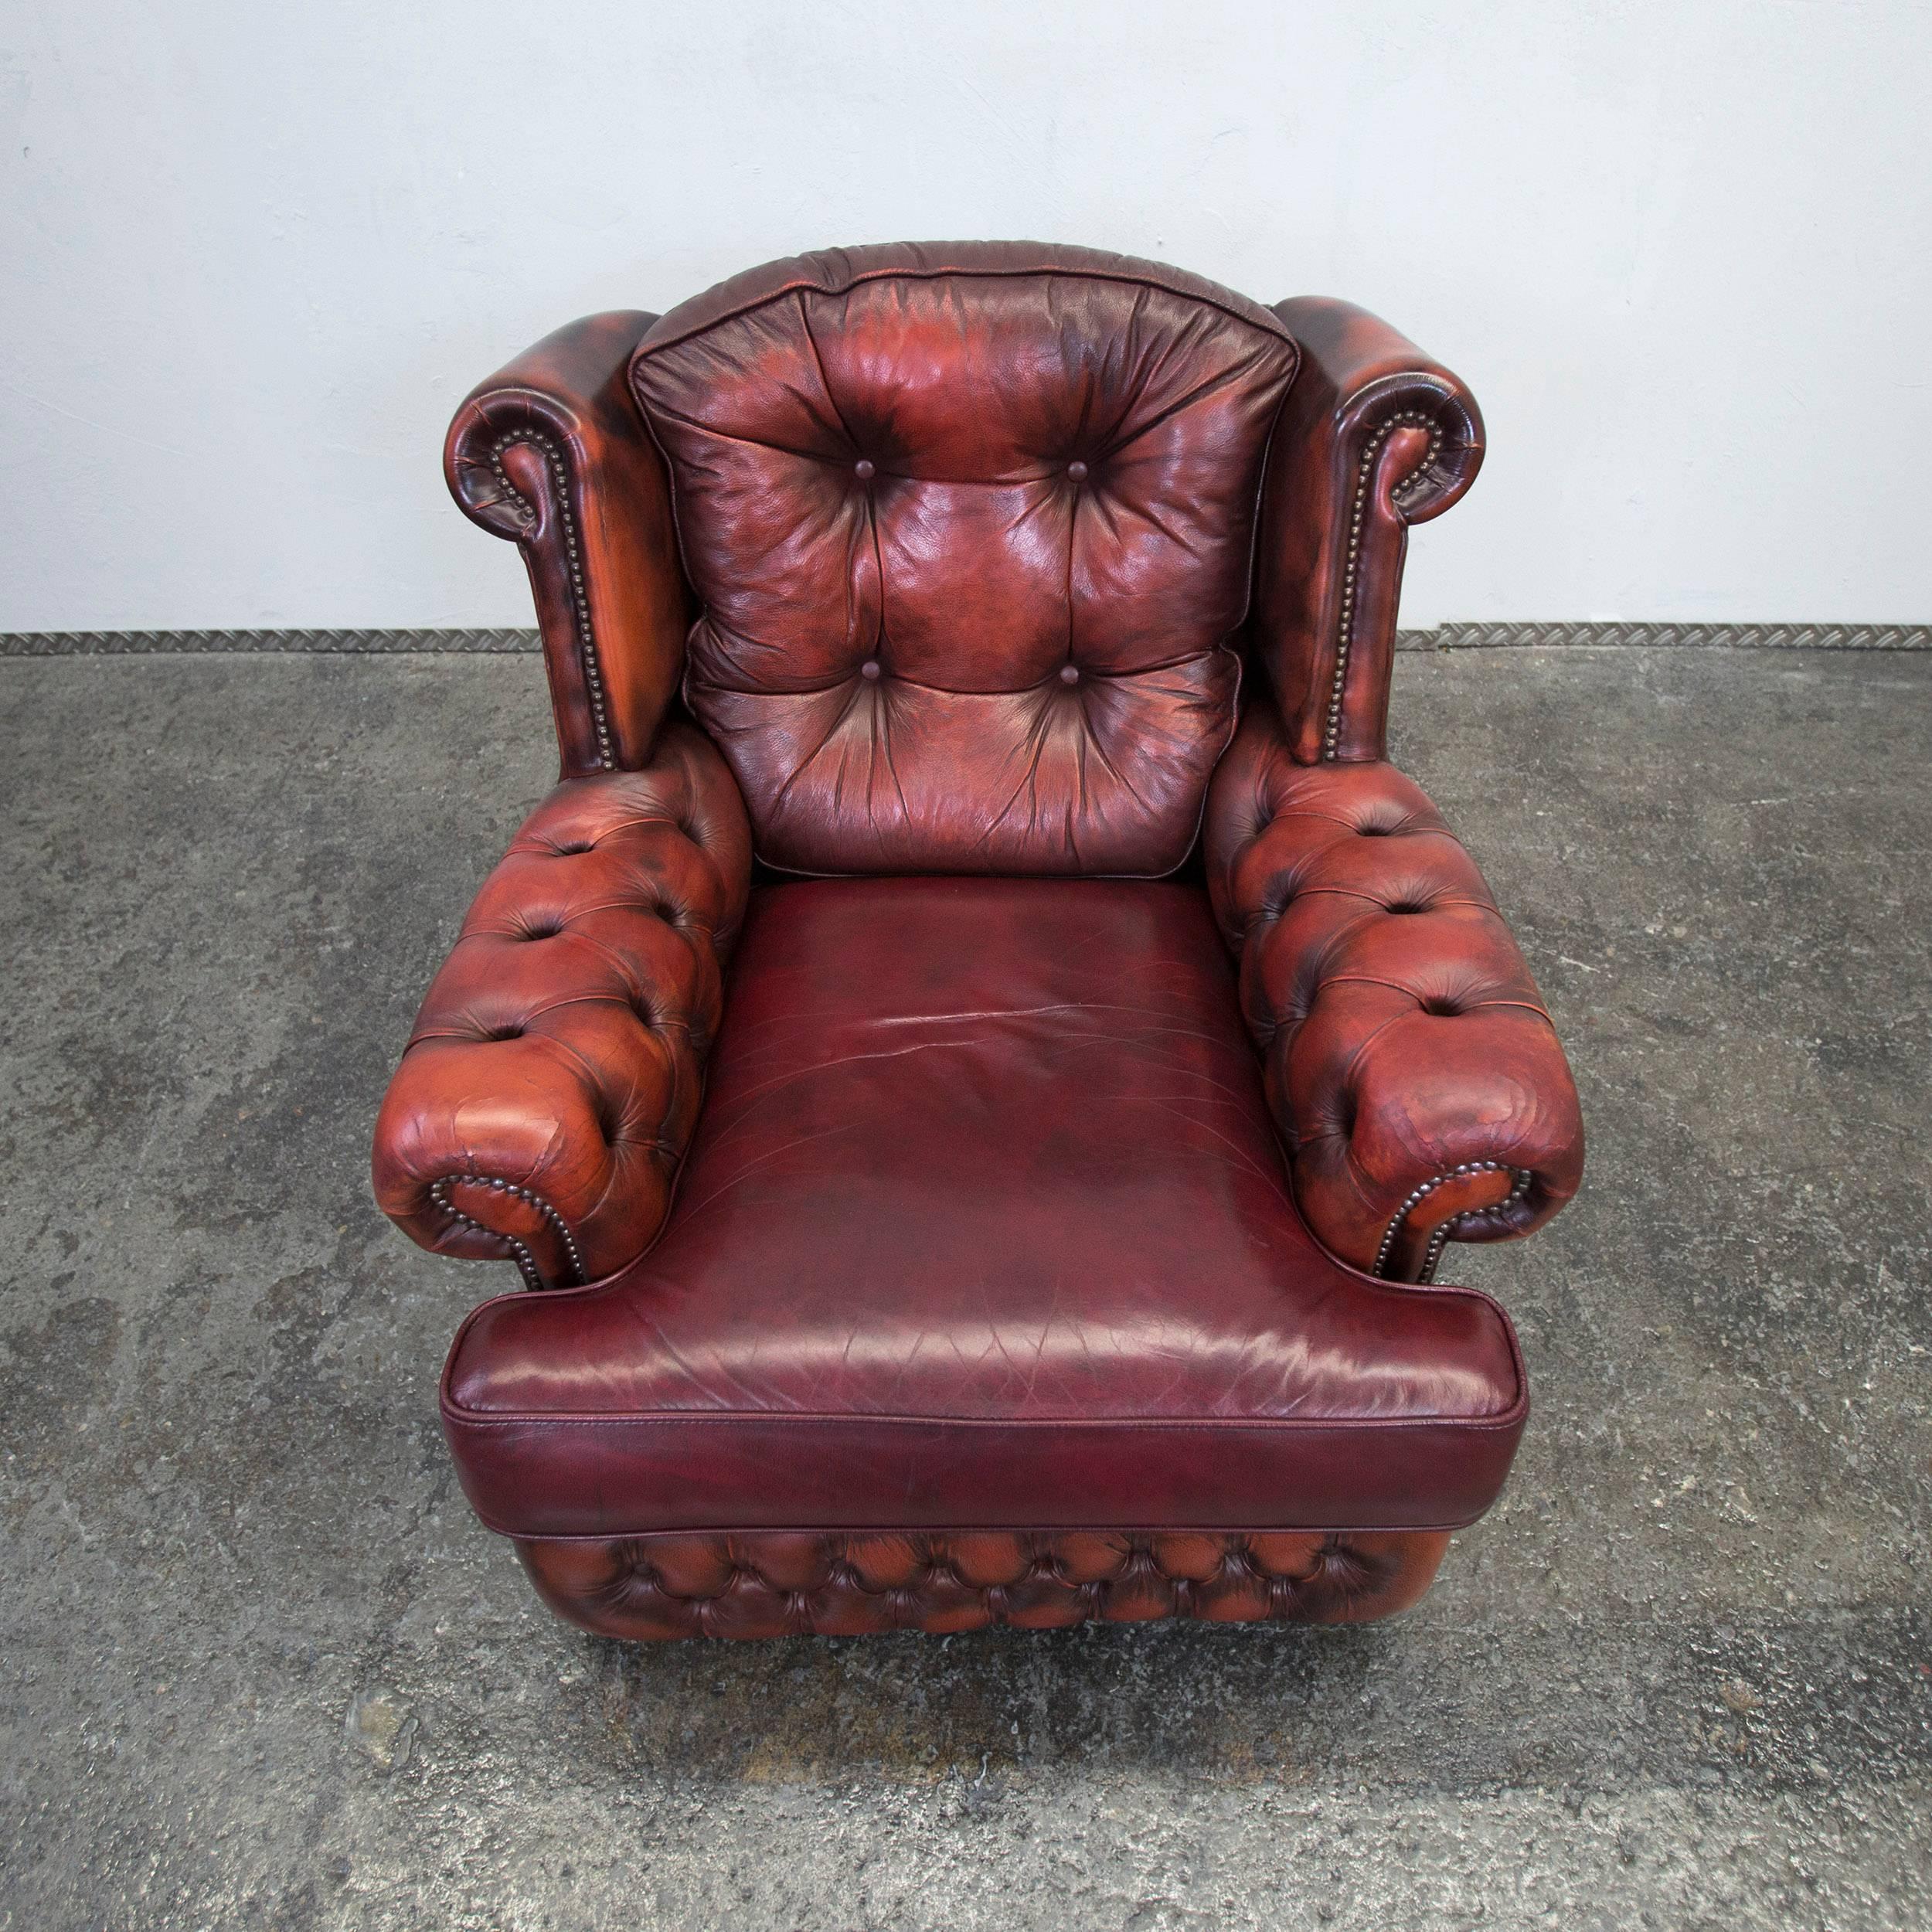 British Chesterfield Leather Armchair Red Brown One Seat Chair Couch Vintage Retro